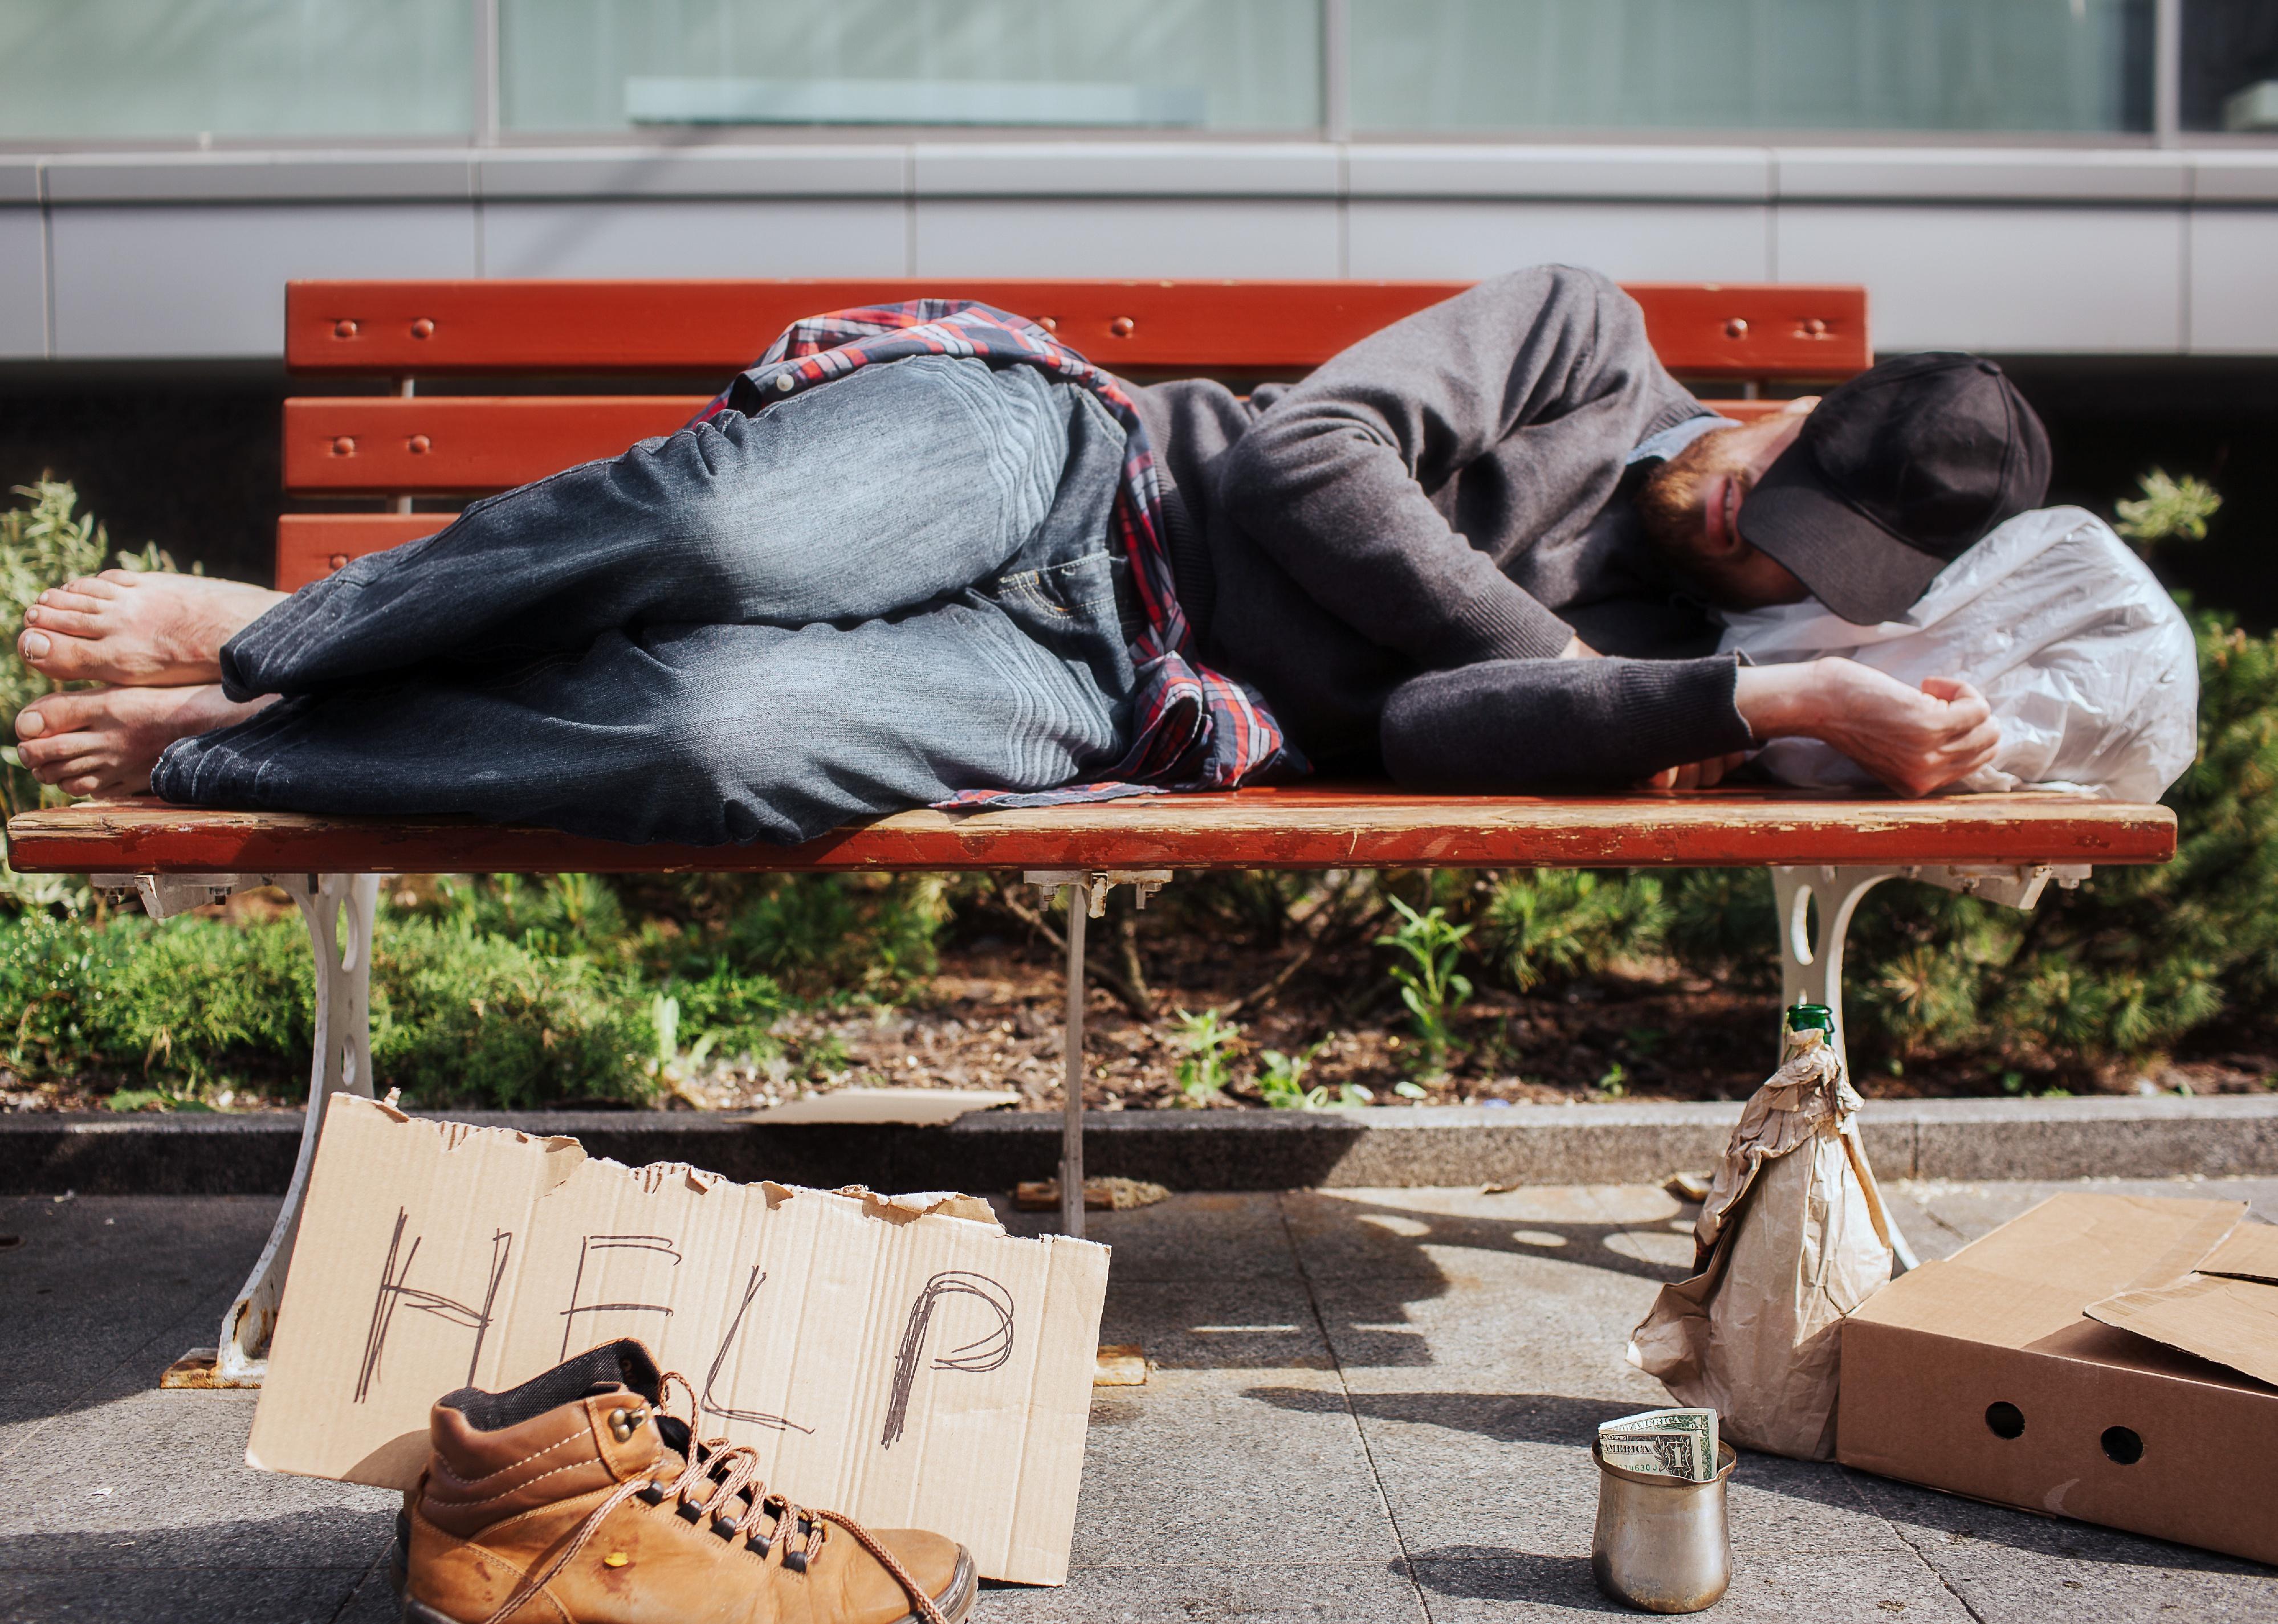 Homeless man is lying on bench and sleeping.